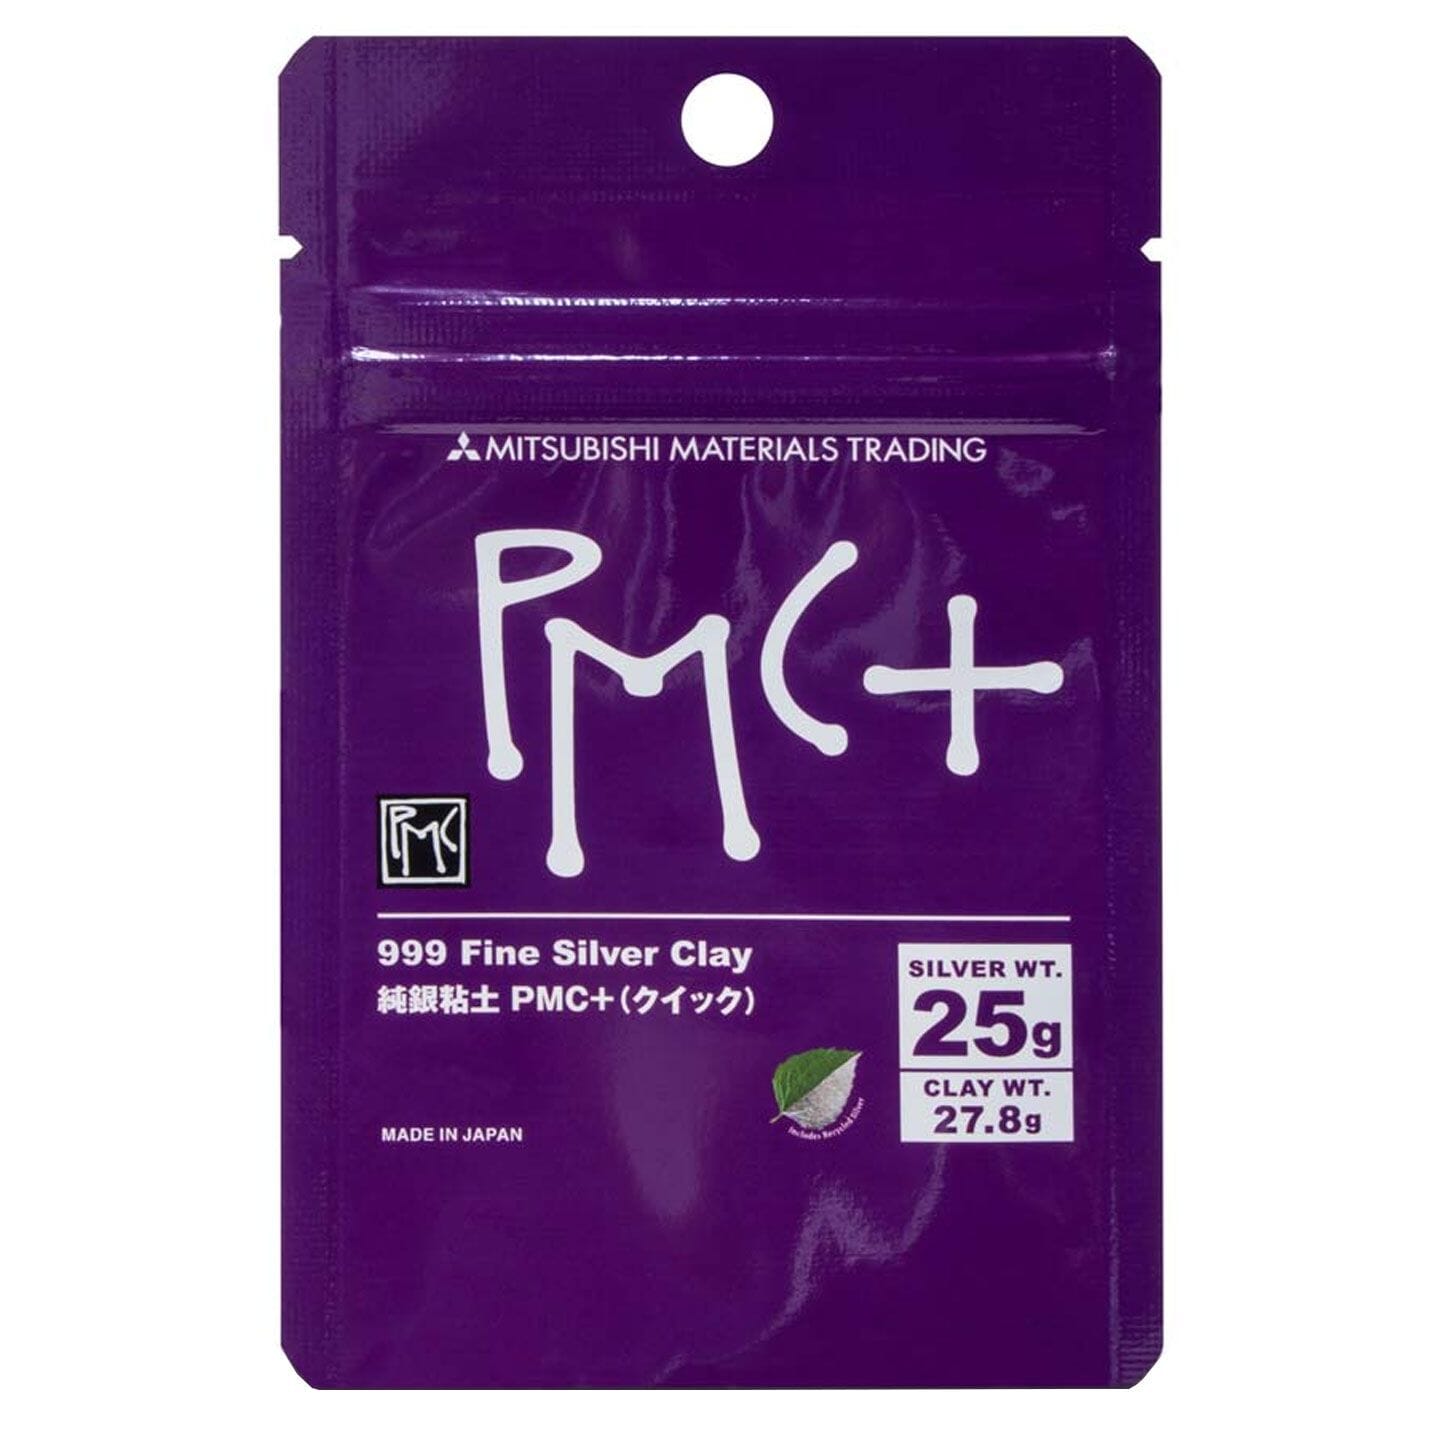 PMC+ Precious Metal Clay Silver Weight 25g PMC Plus 999 Fine Silver Clay,  for Making Accessories & Jewelry